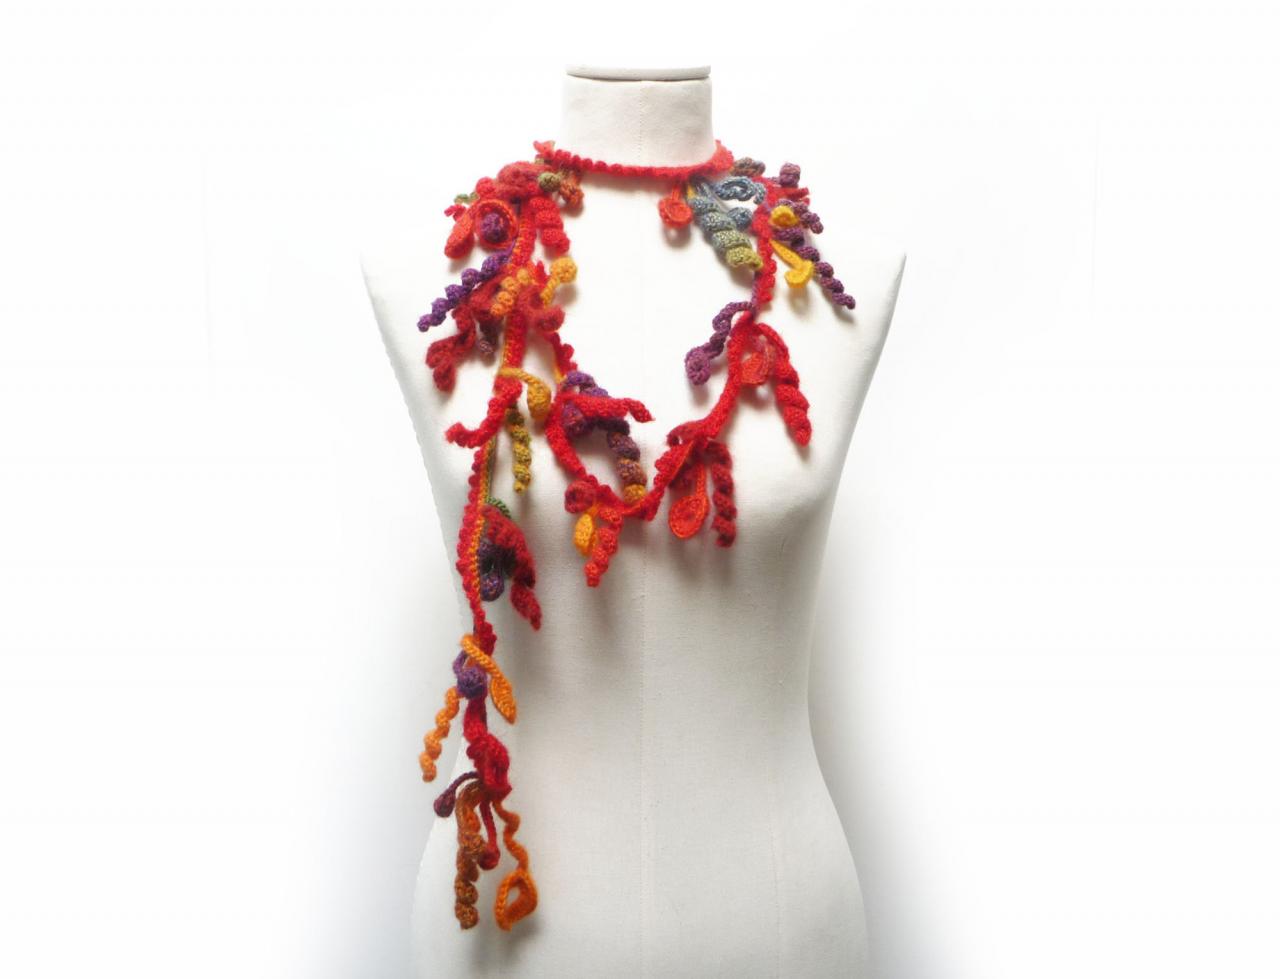 Crochet Freeform Lariat Necklace, Red Orange Yellow Purple Green Wool With Flowers And Leaves, Long Fall Winter Fiber Garland Necklace